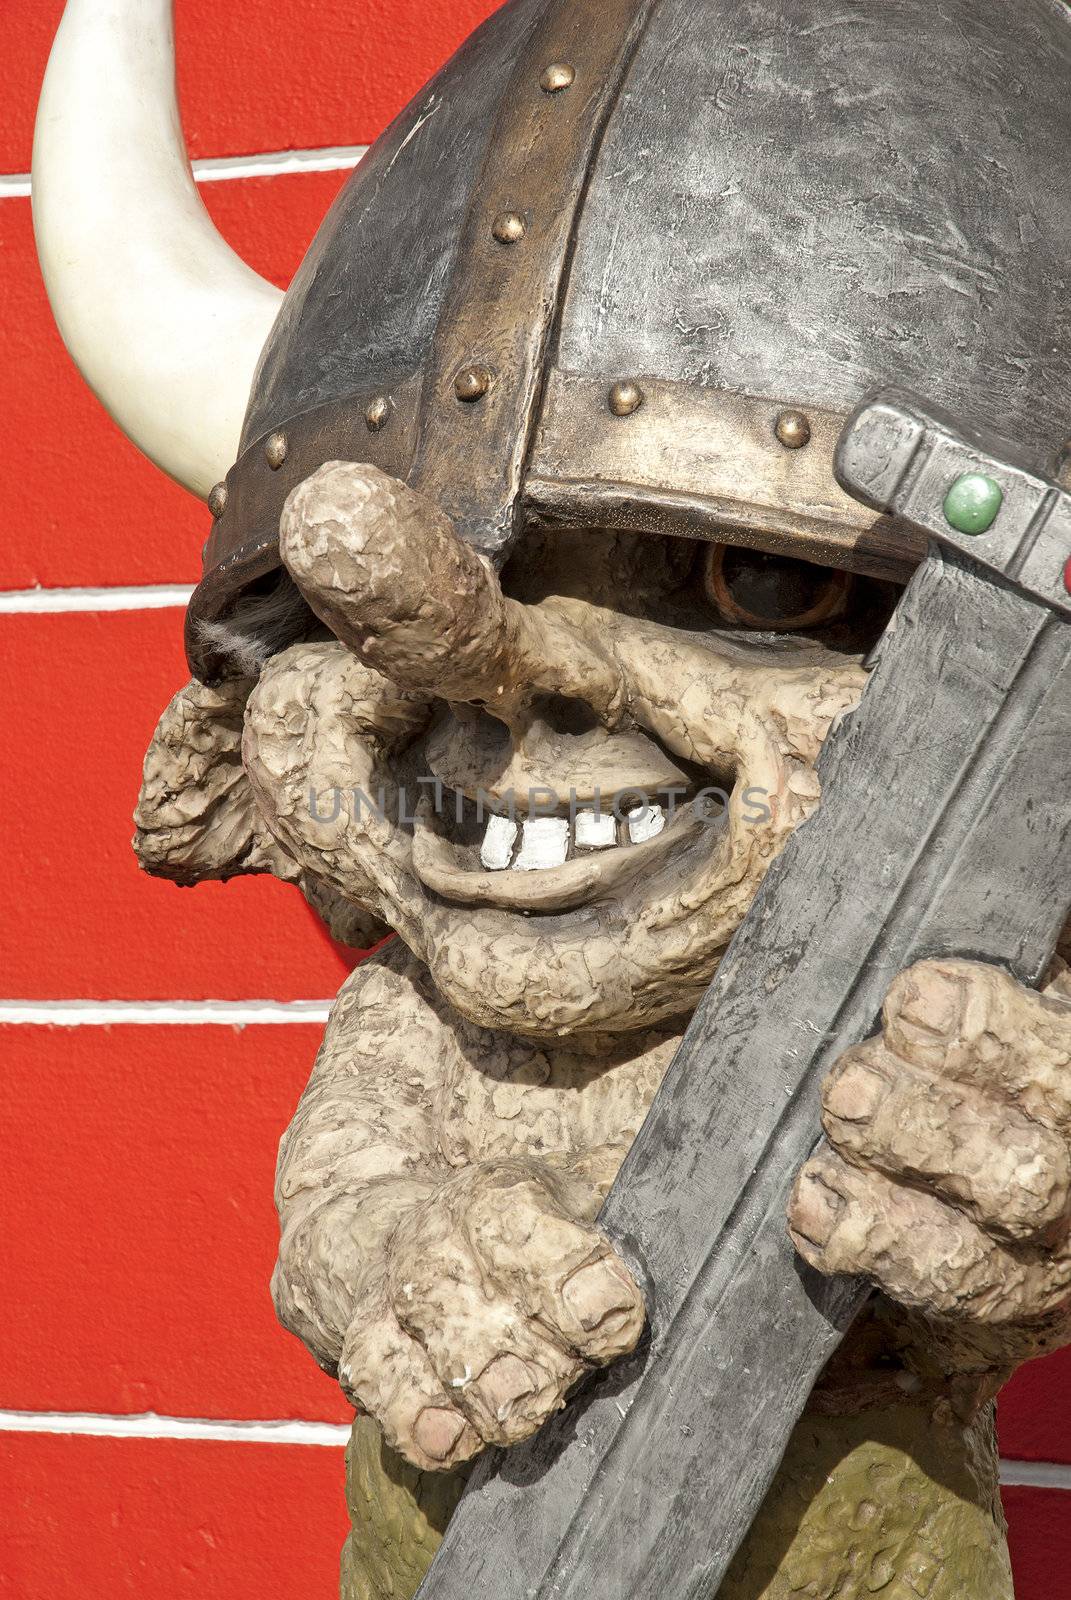 troll mythical viking figure in iceland